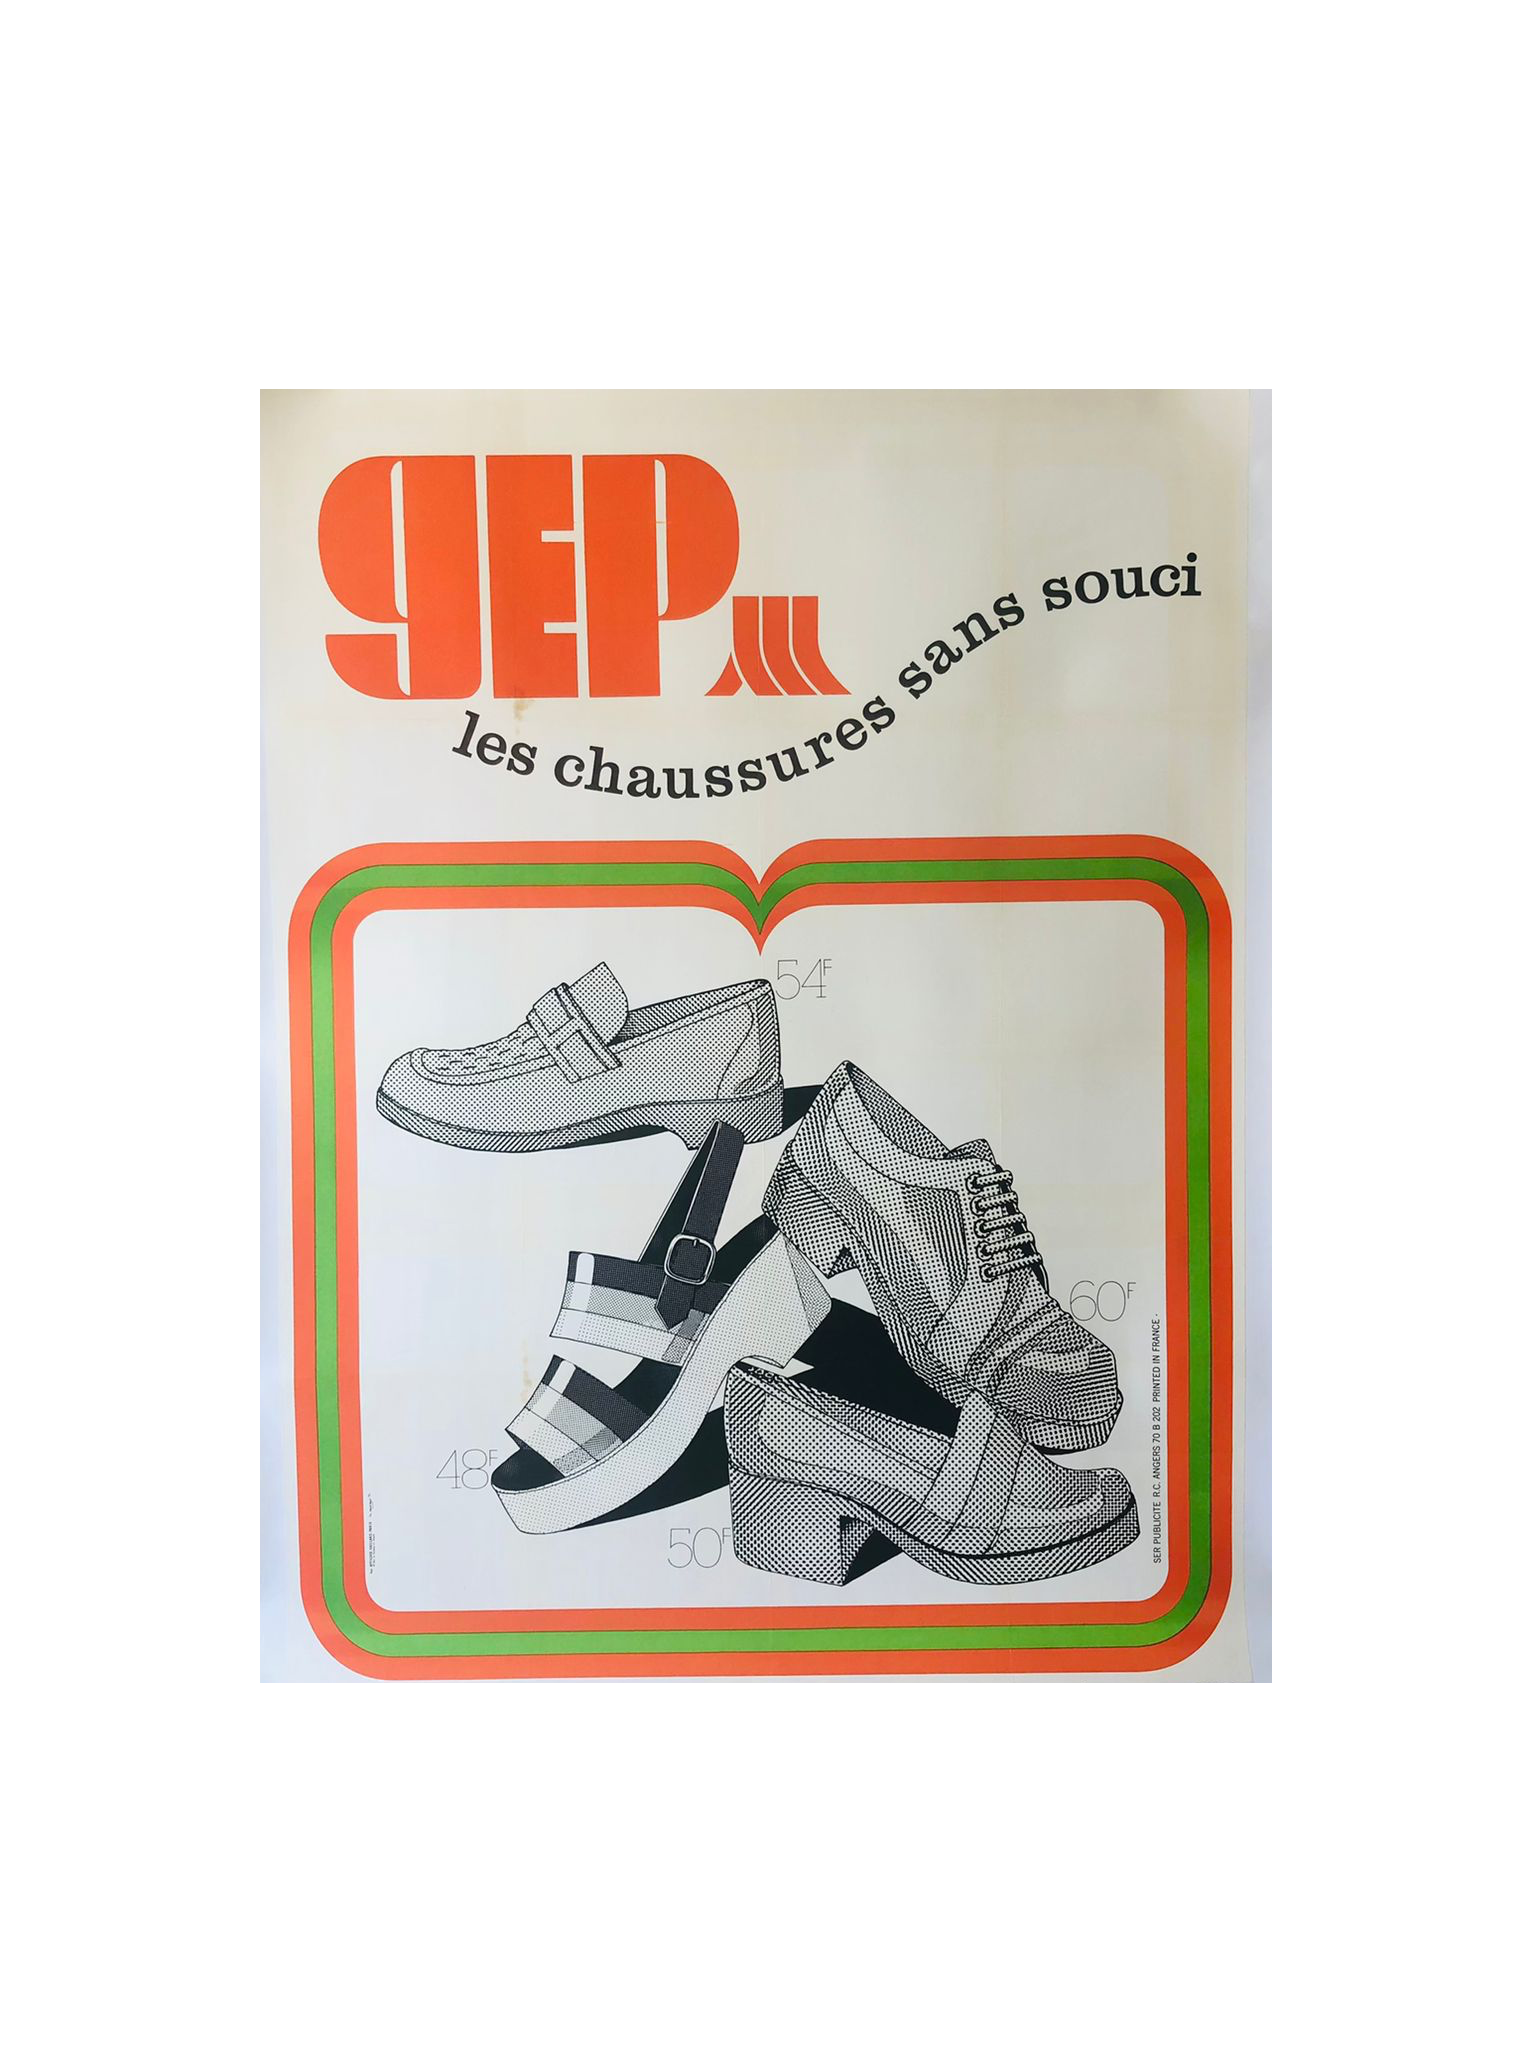 Gep Shoes Advertisement